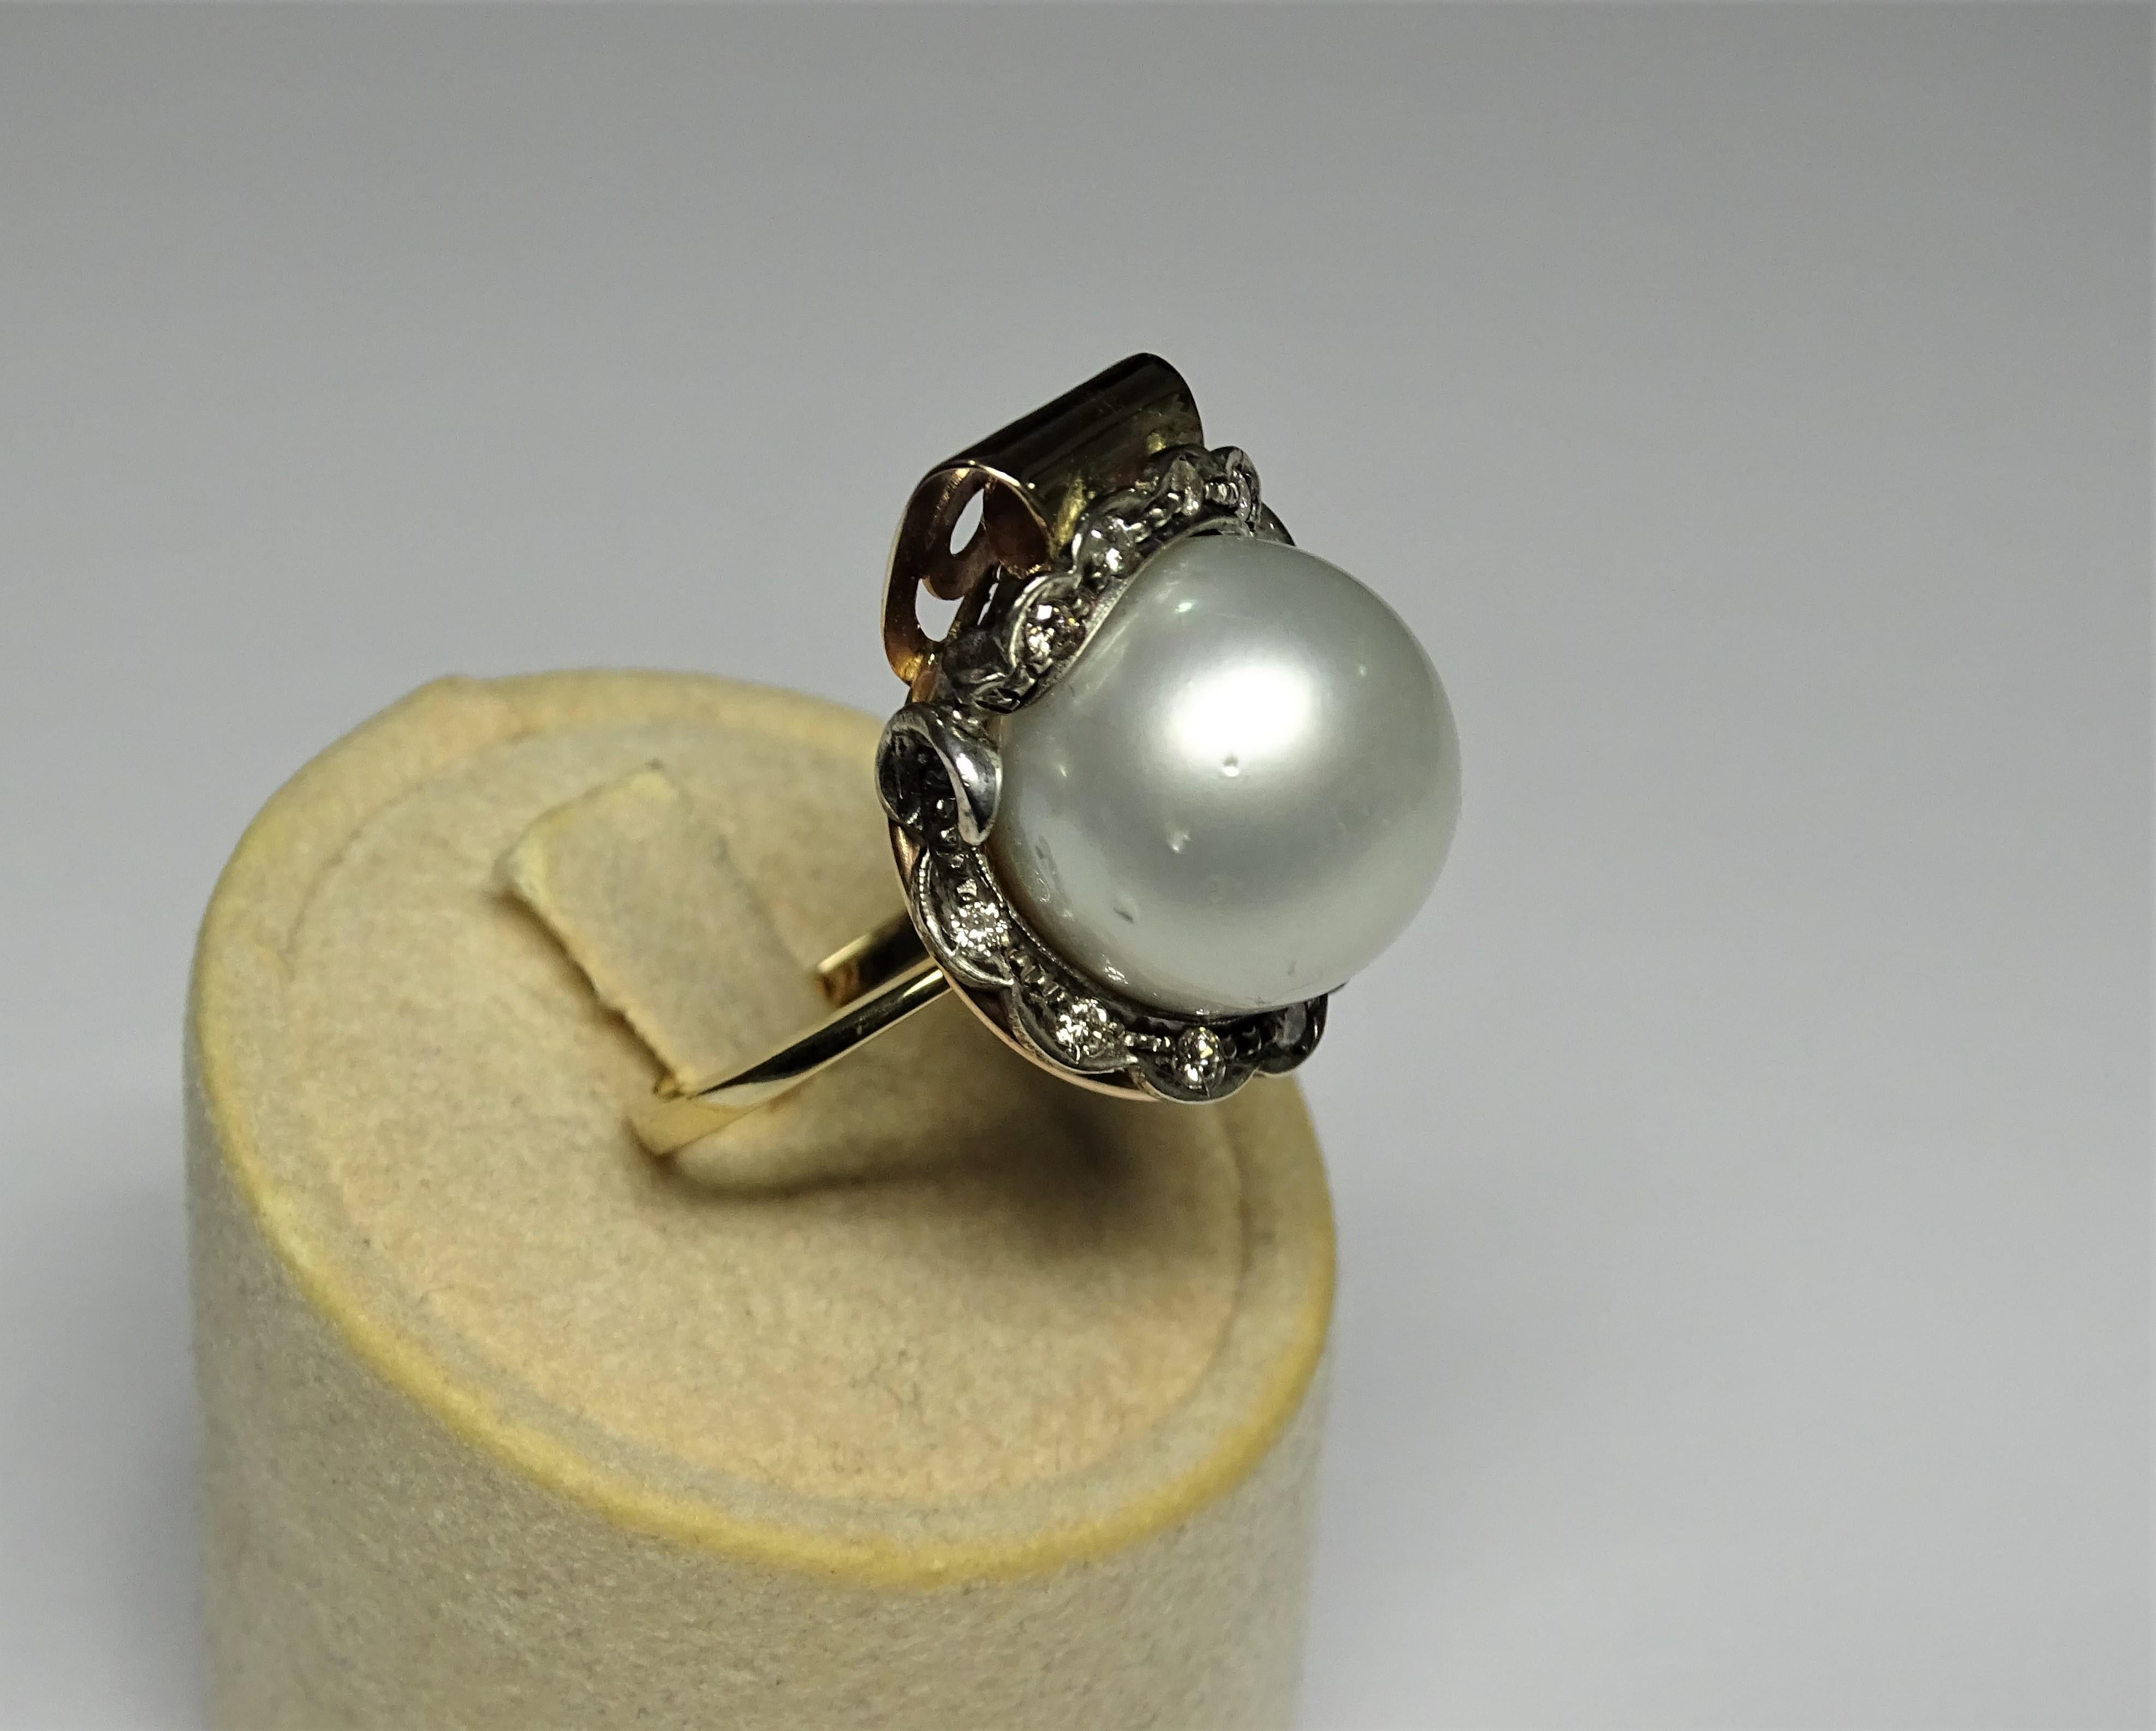 This Ring is made of 14K Yellow Gold and Sterling Silver.
This Ring have 0.33 Carats of White Diamonds Round Cut.
This Ring have 25.22 Carats of Pearl ( mm 15 ).
Size ITA: 16 - USA: 7.5
We're a workshop so every piece is handmade, customizable and